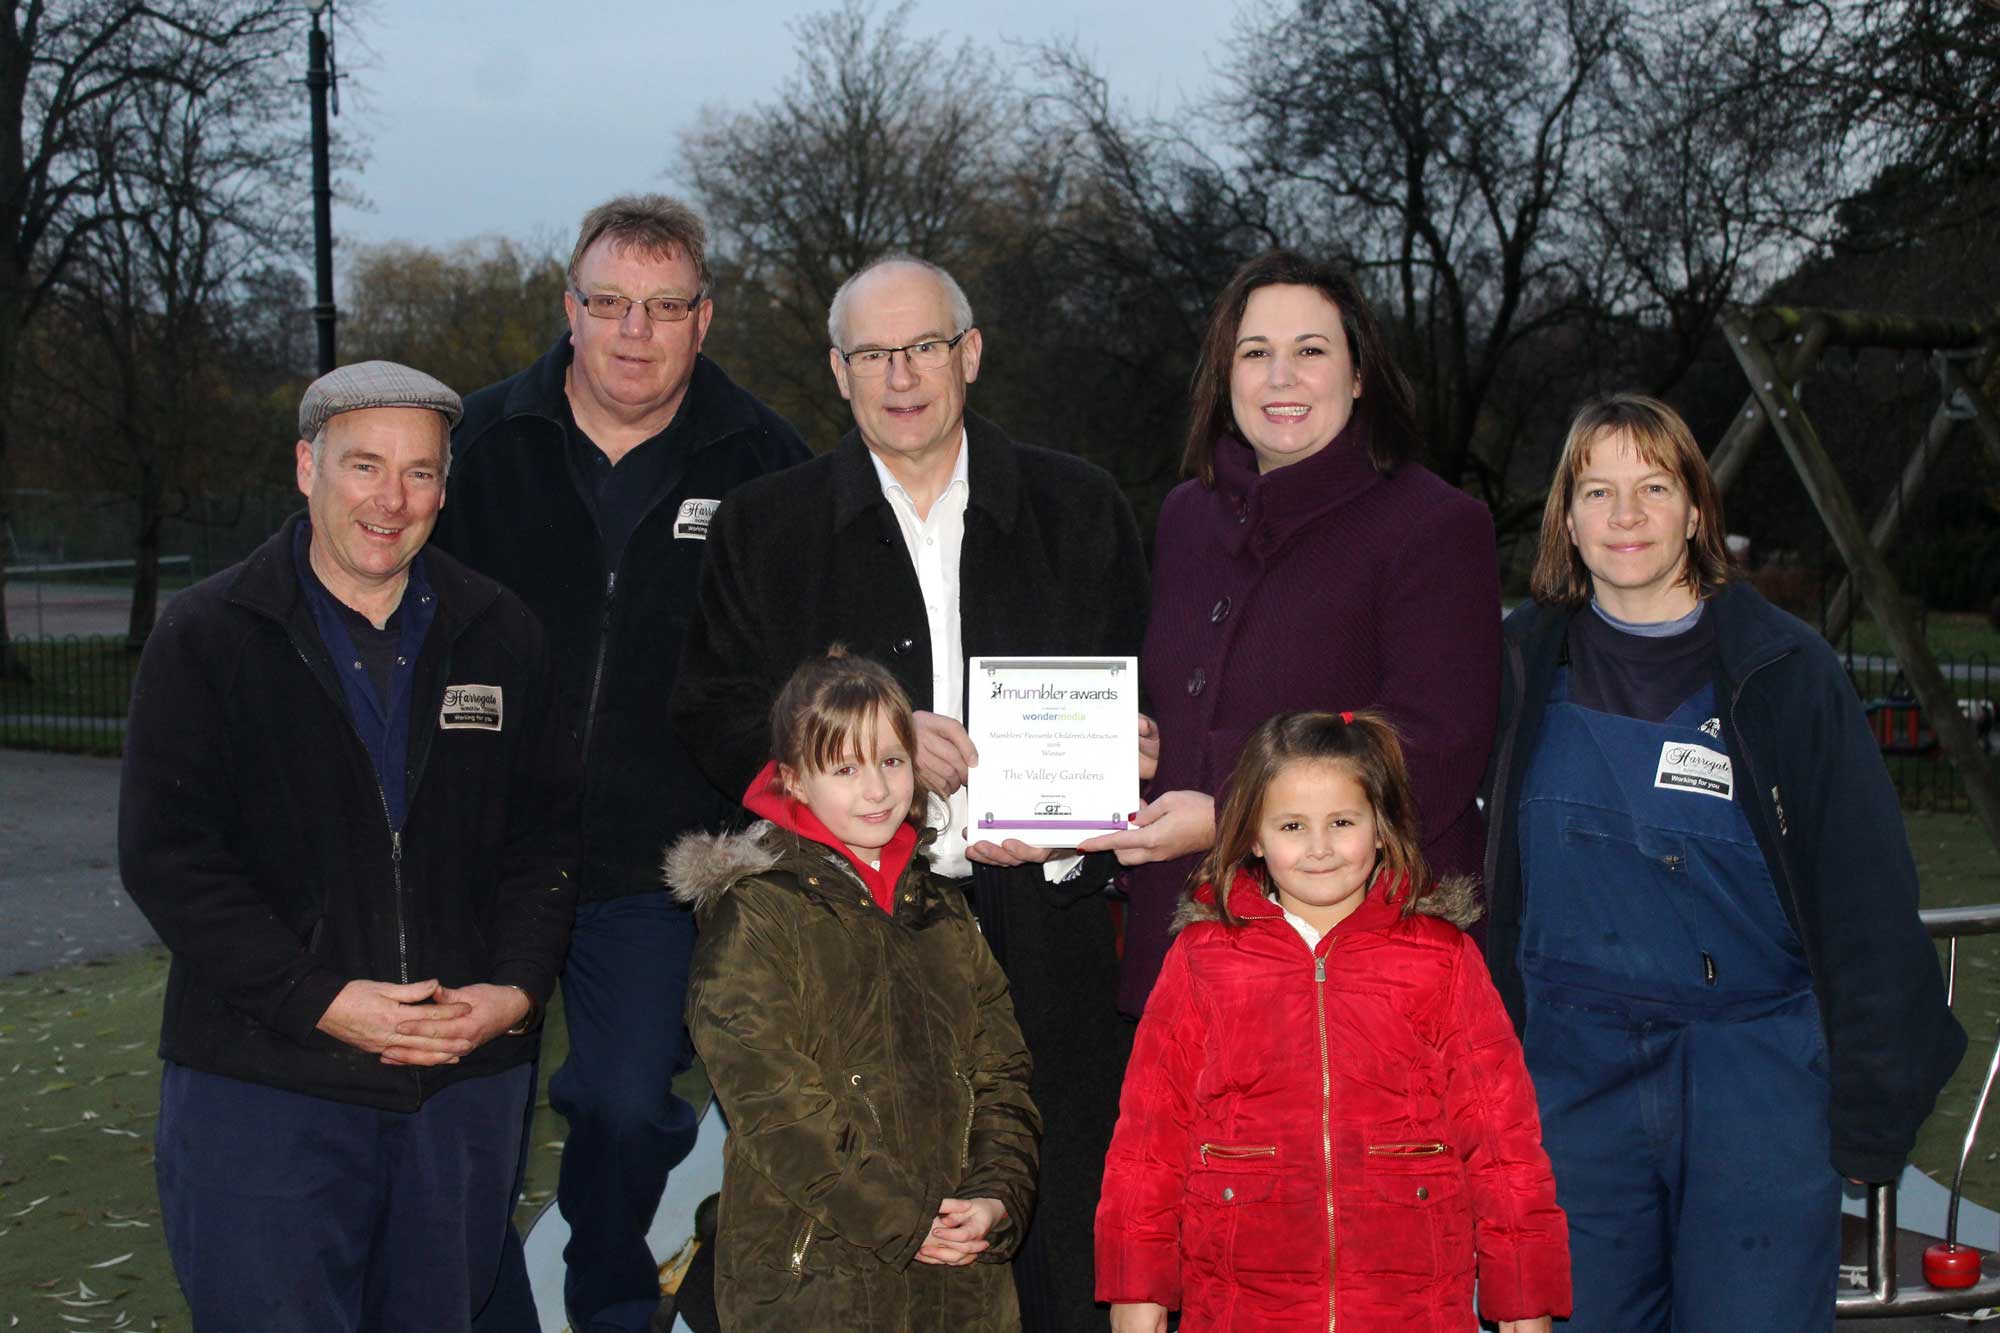 Harrogate MUMbler’s Sally Haslewood and daughters Tilly and Eva present the award won by Valley Gardens to (L-R) gardener Simon Collier, Senior Play Area Technician Tony Jackson, Head of Parks & Environmental Services Patrick Kilburn and gardener Paula Collier